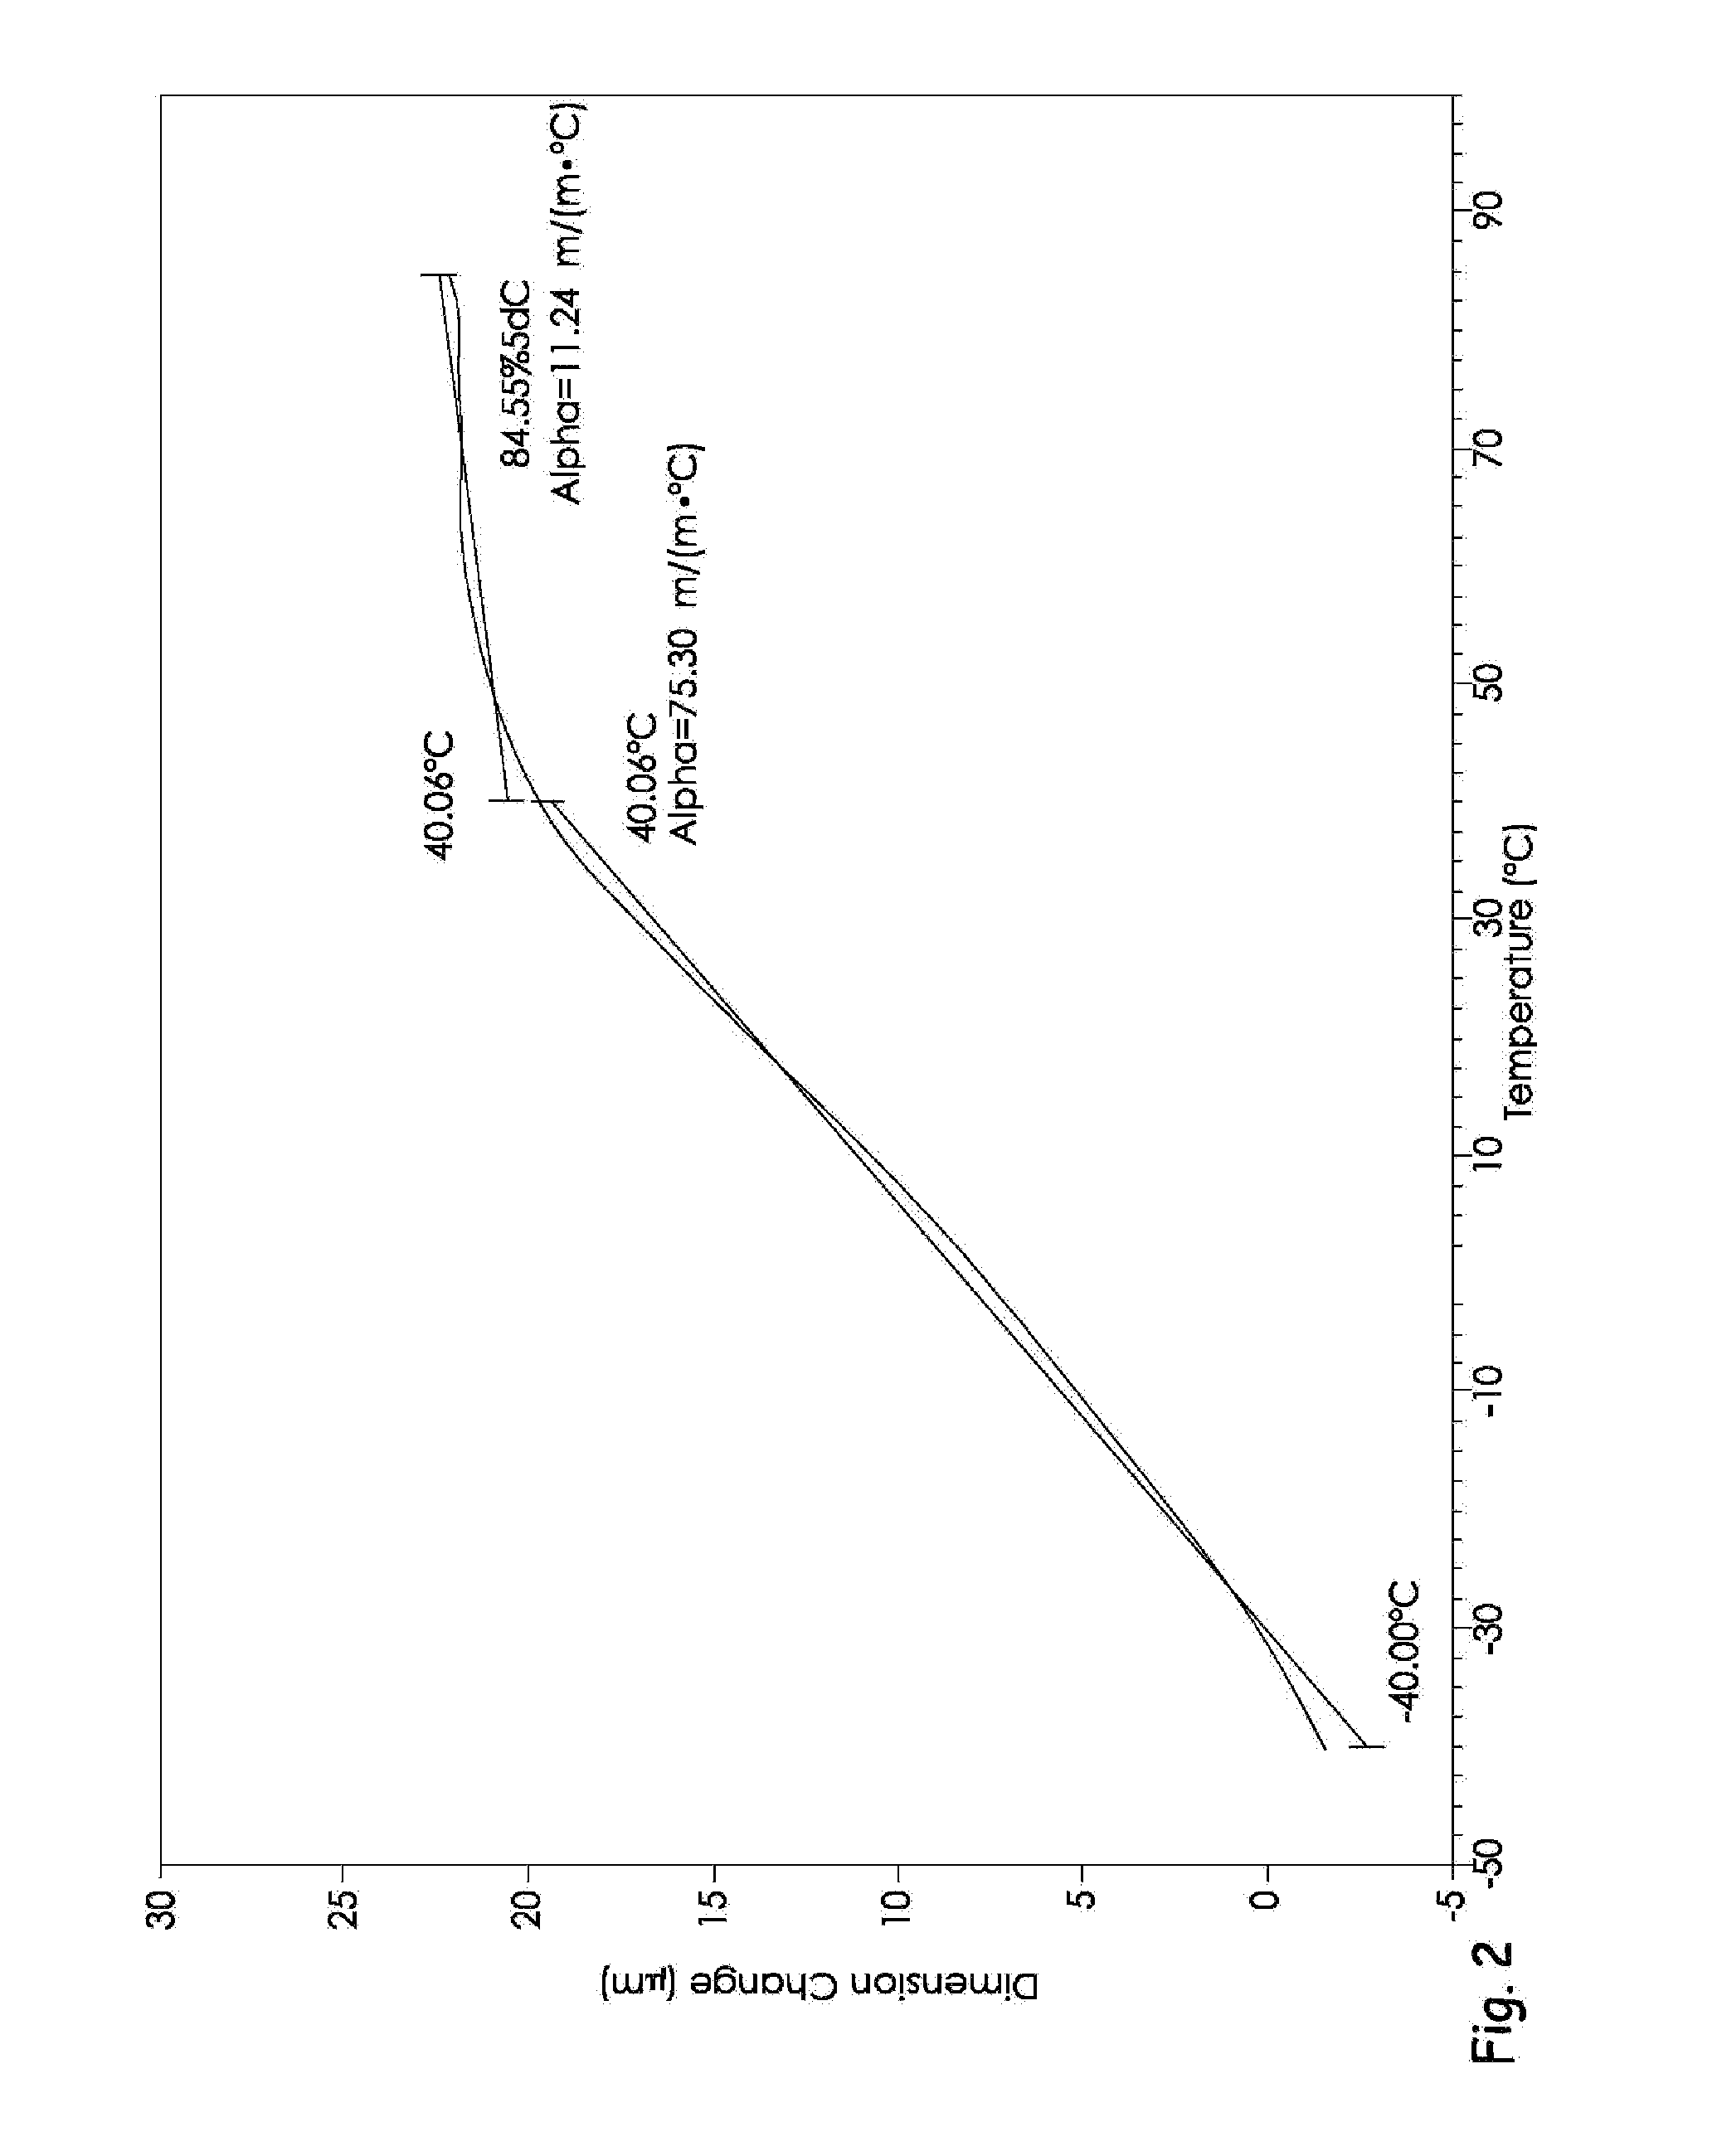 Building integrated photovoltaic having injection molded component